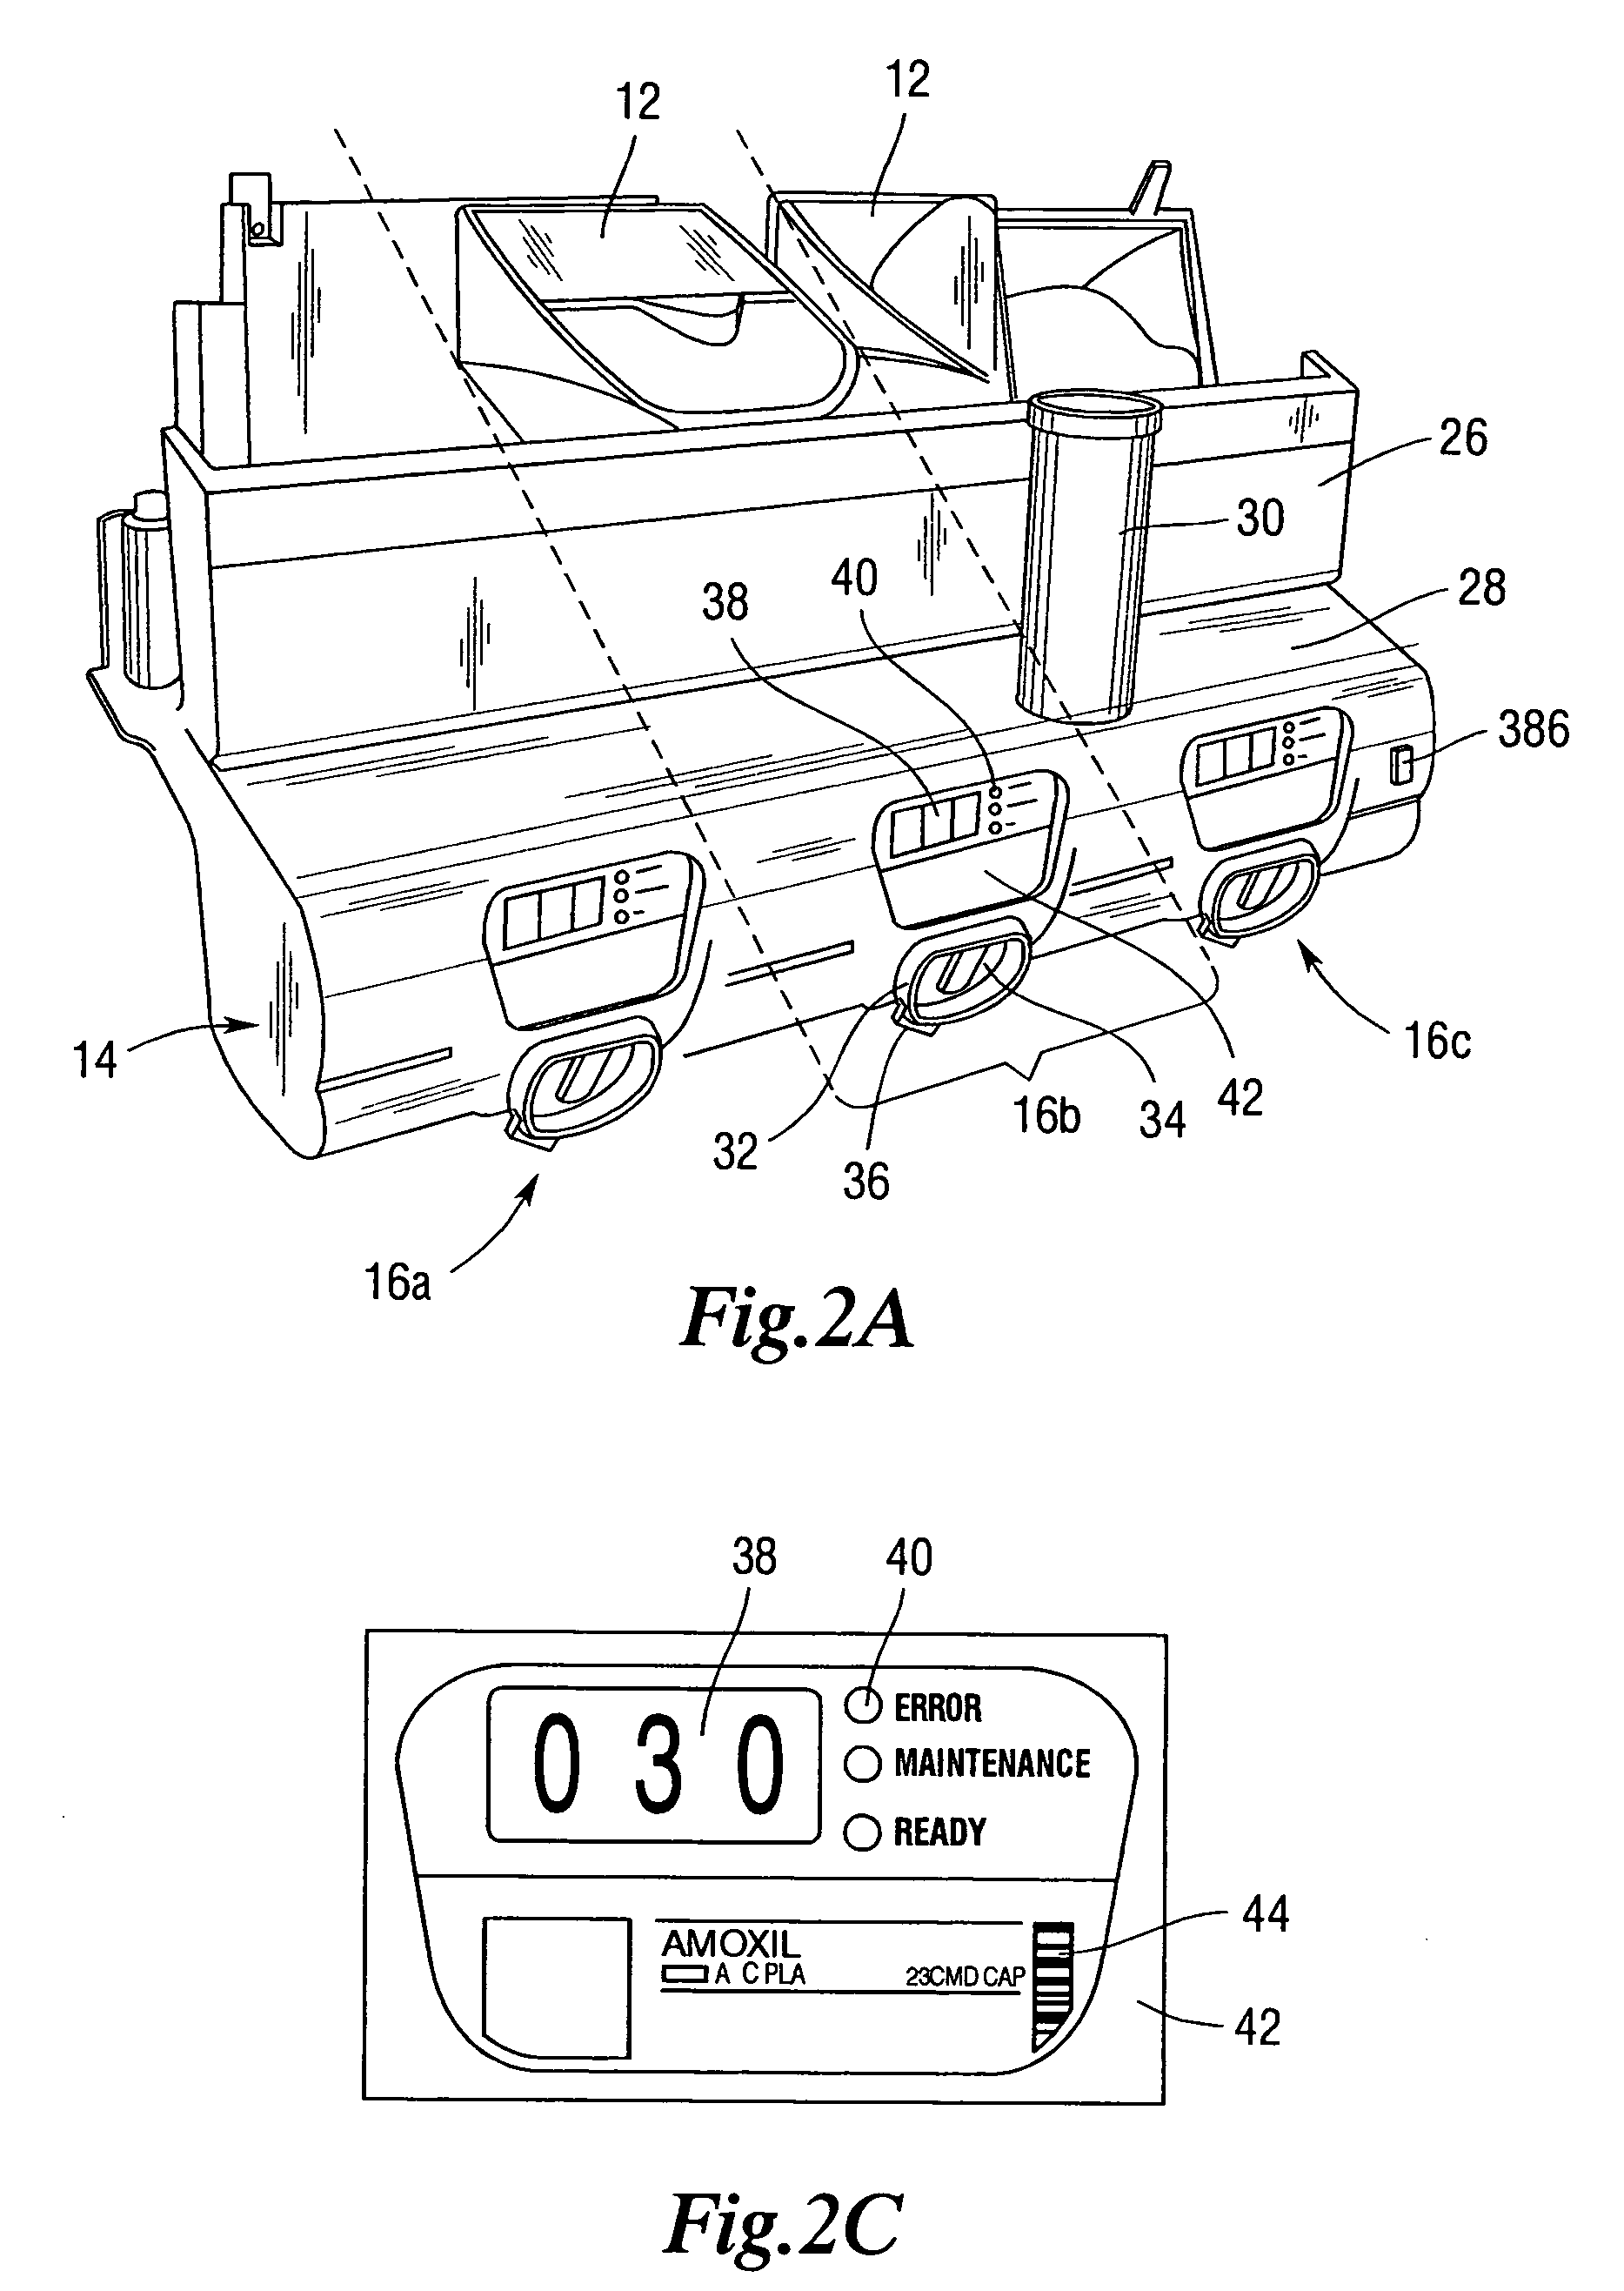 Dispensing device having a storage chamber, dispensing chamber and a feed regulator there between